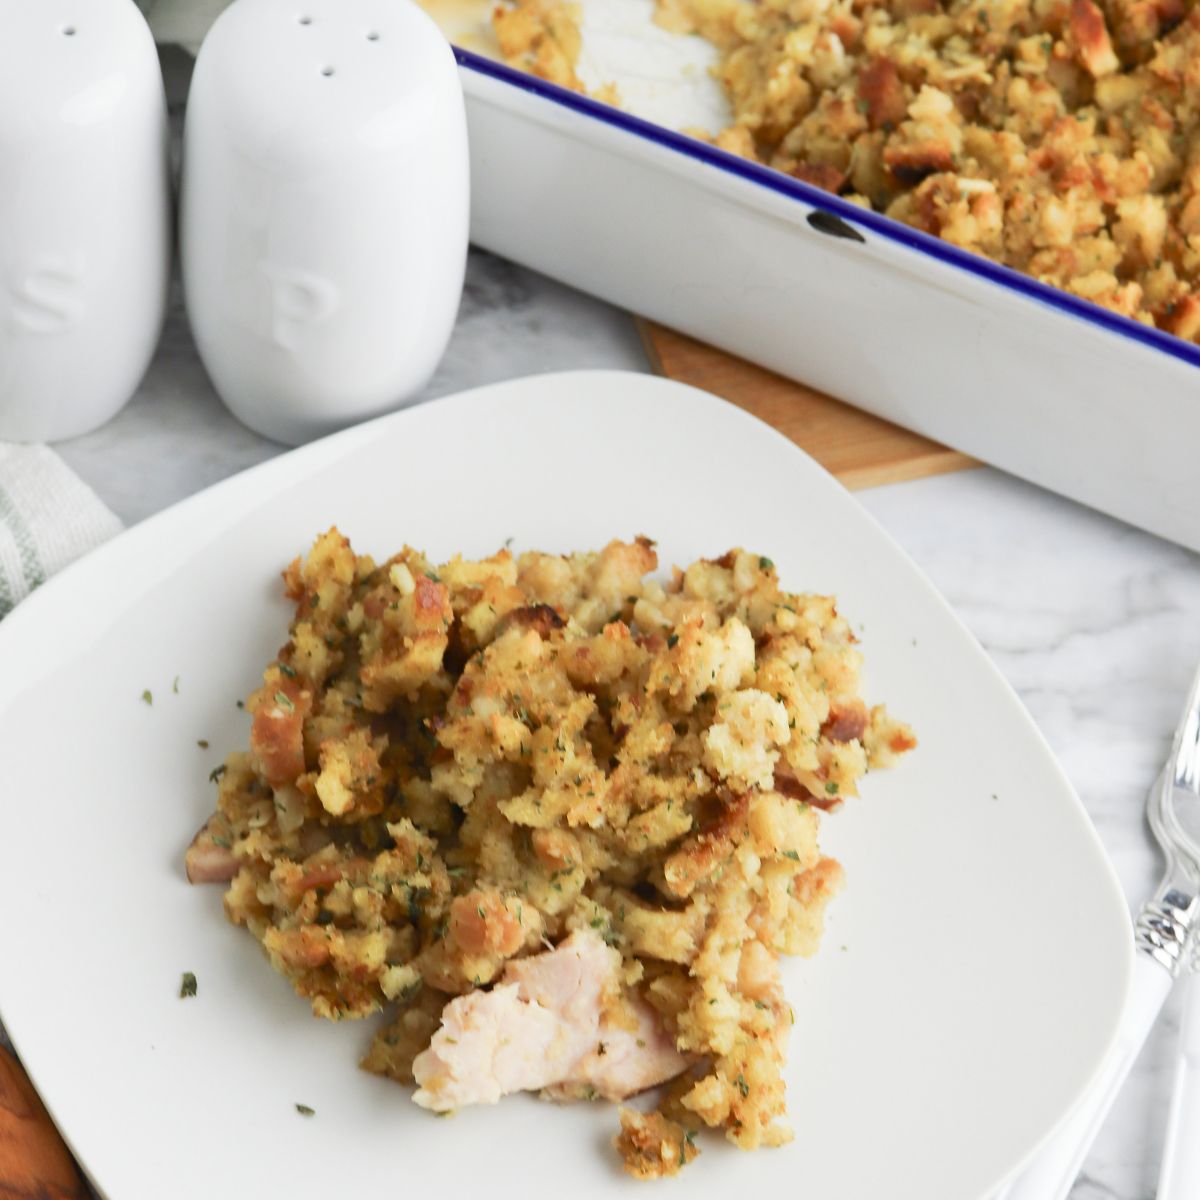 Turkey stuffing on a white plate with salt and pepper shakers.